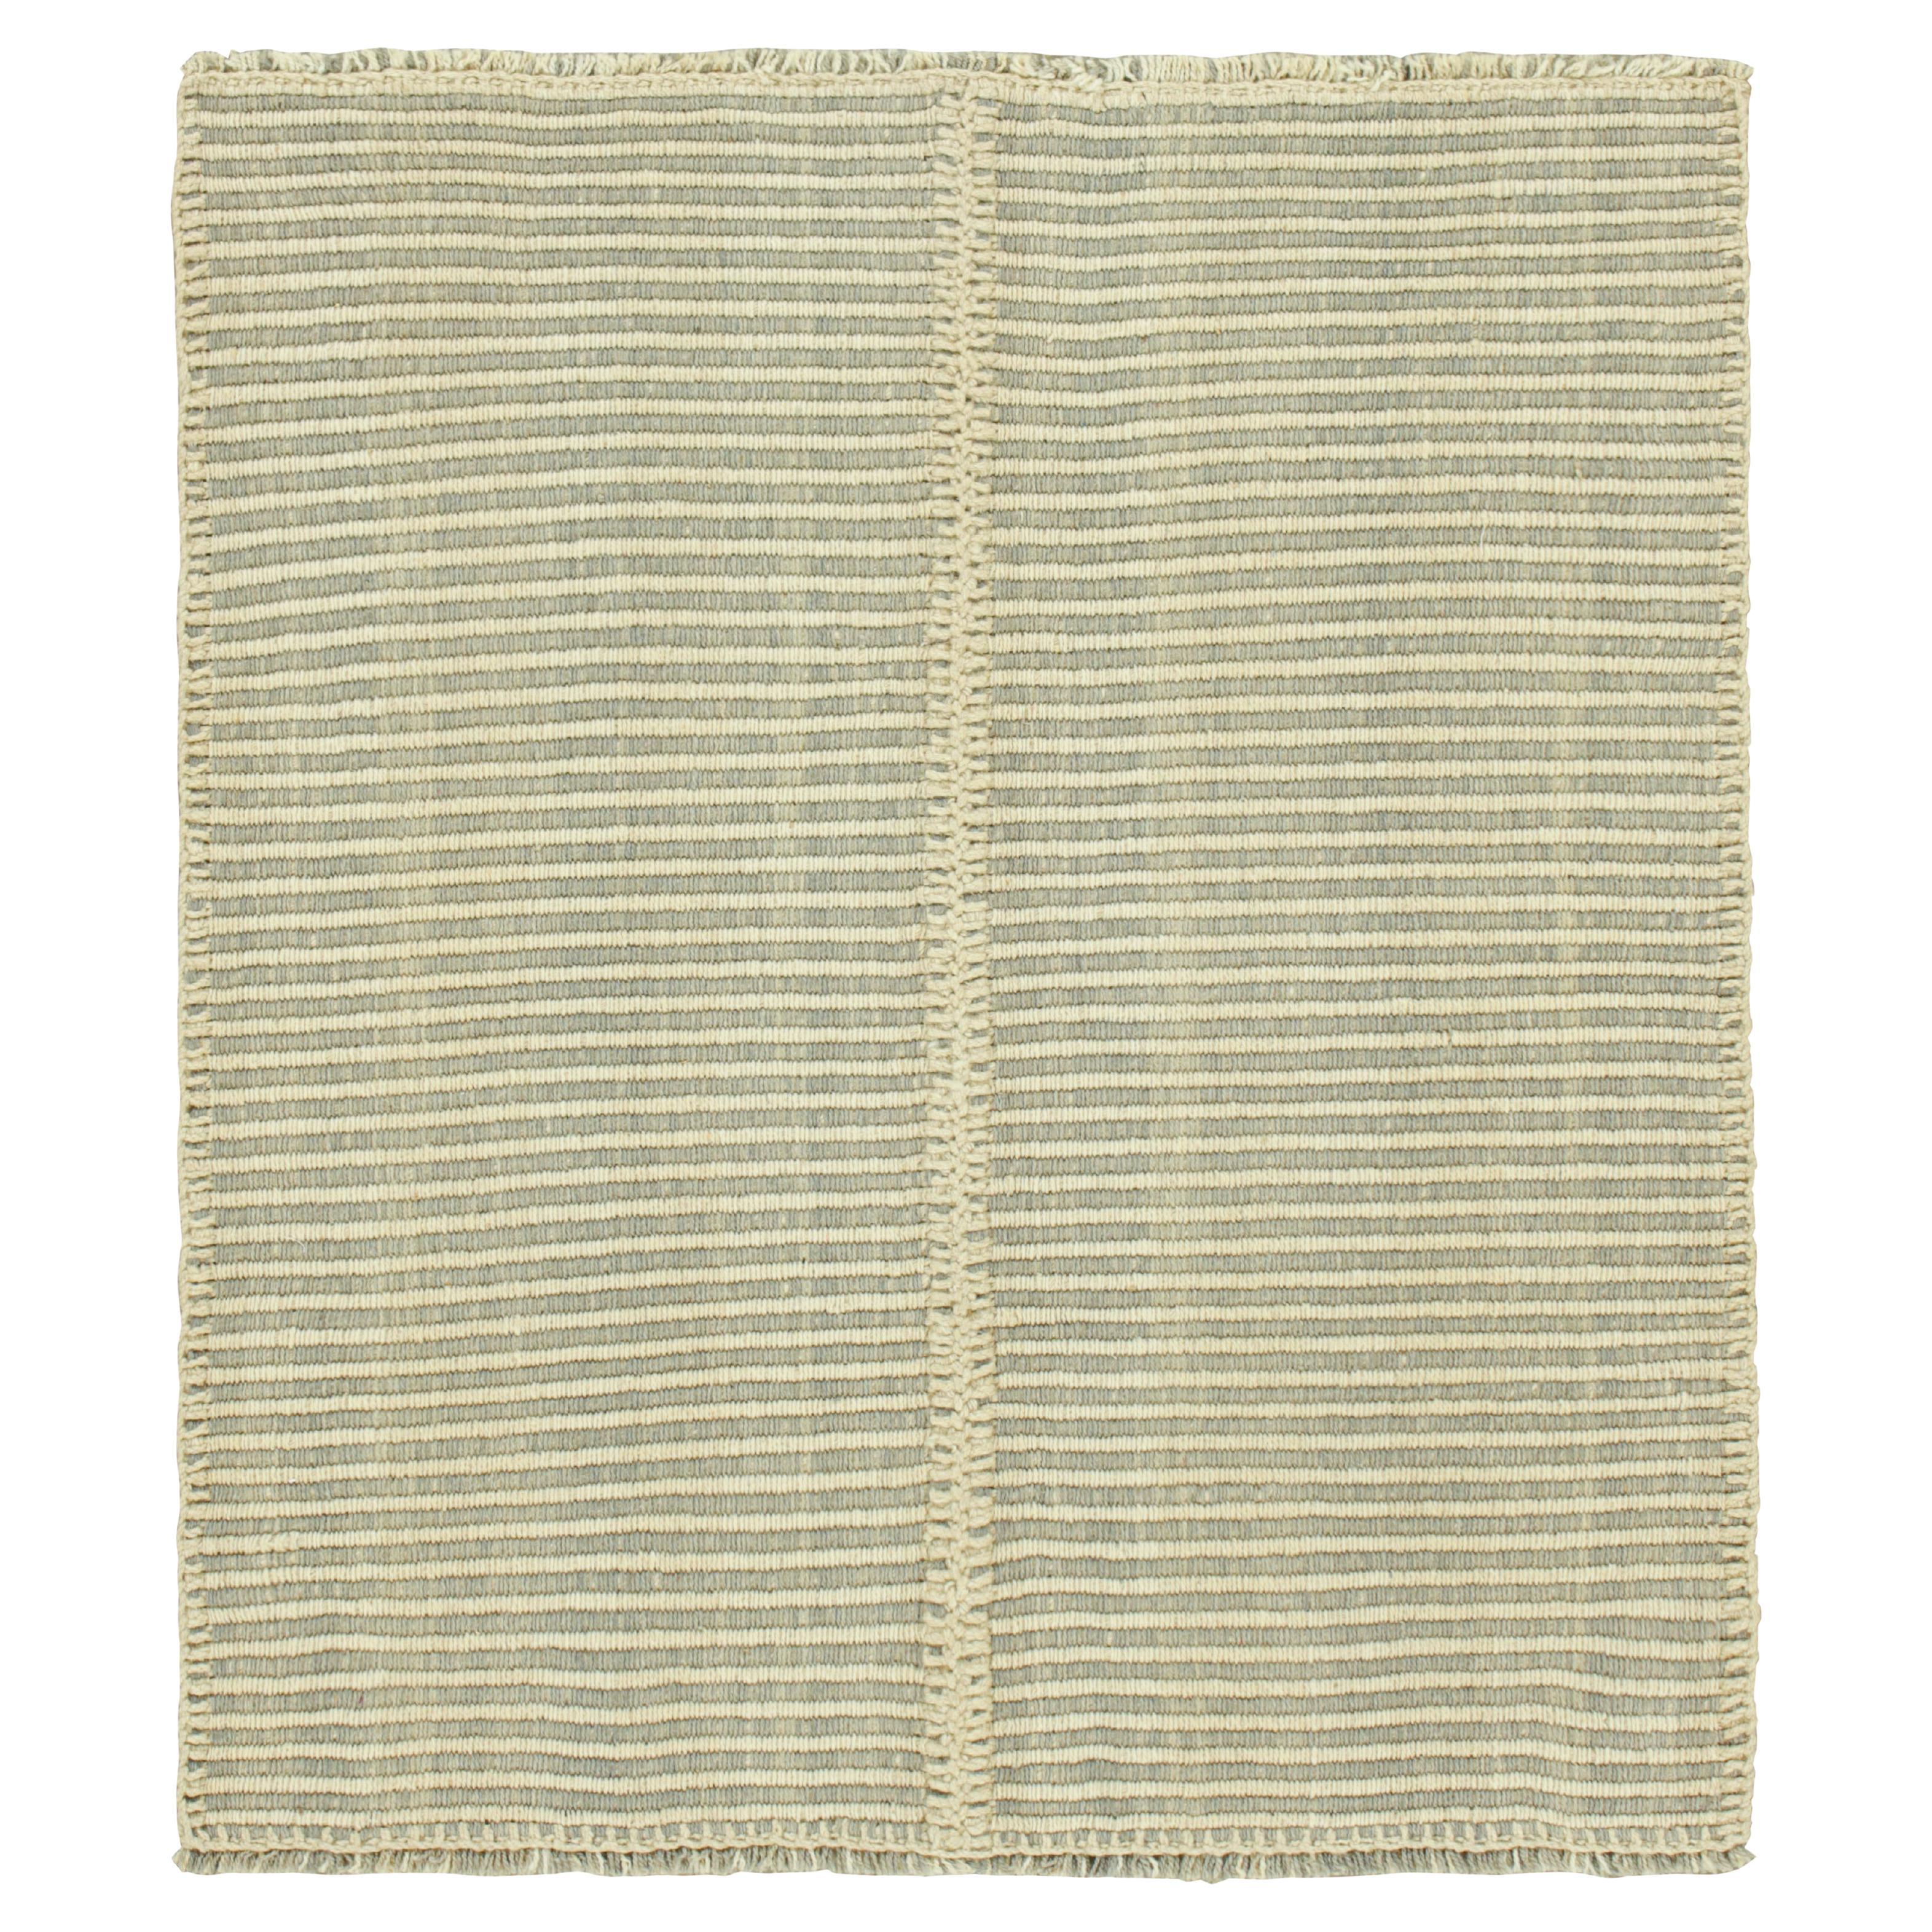 Rug & Kilim’s Contemporary Kilim with Textural Cream White and Gray Stripes